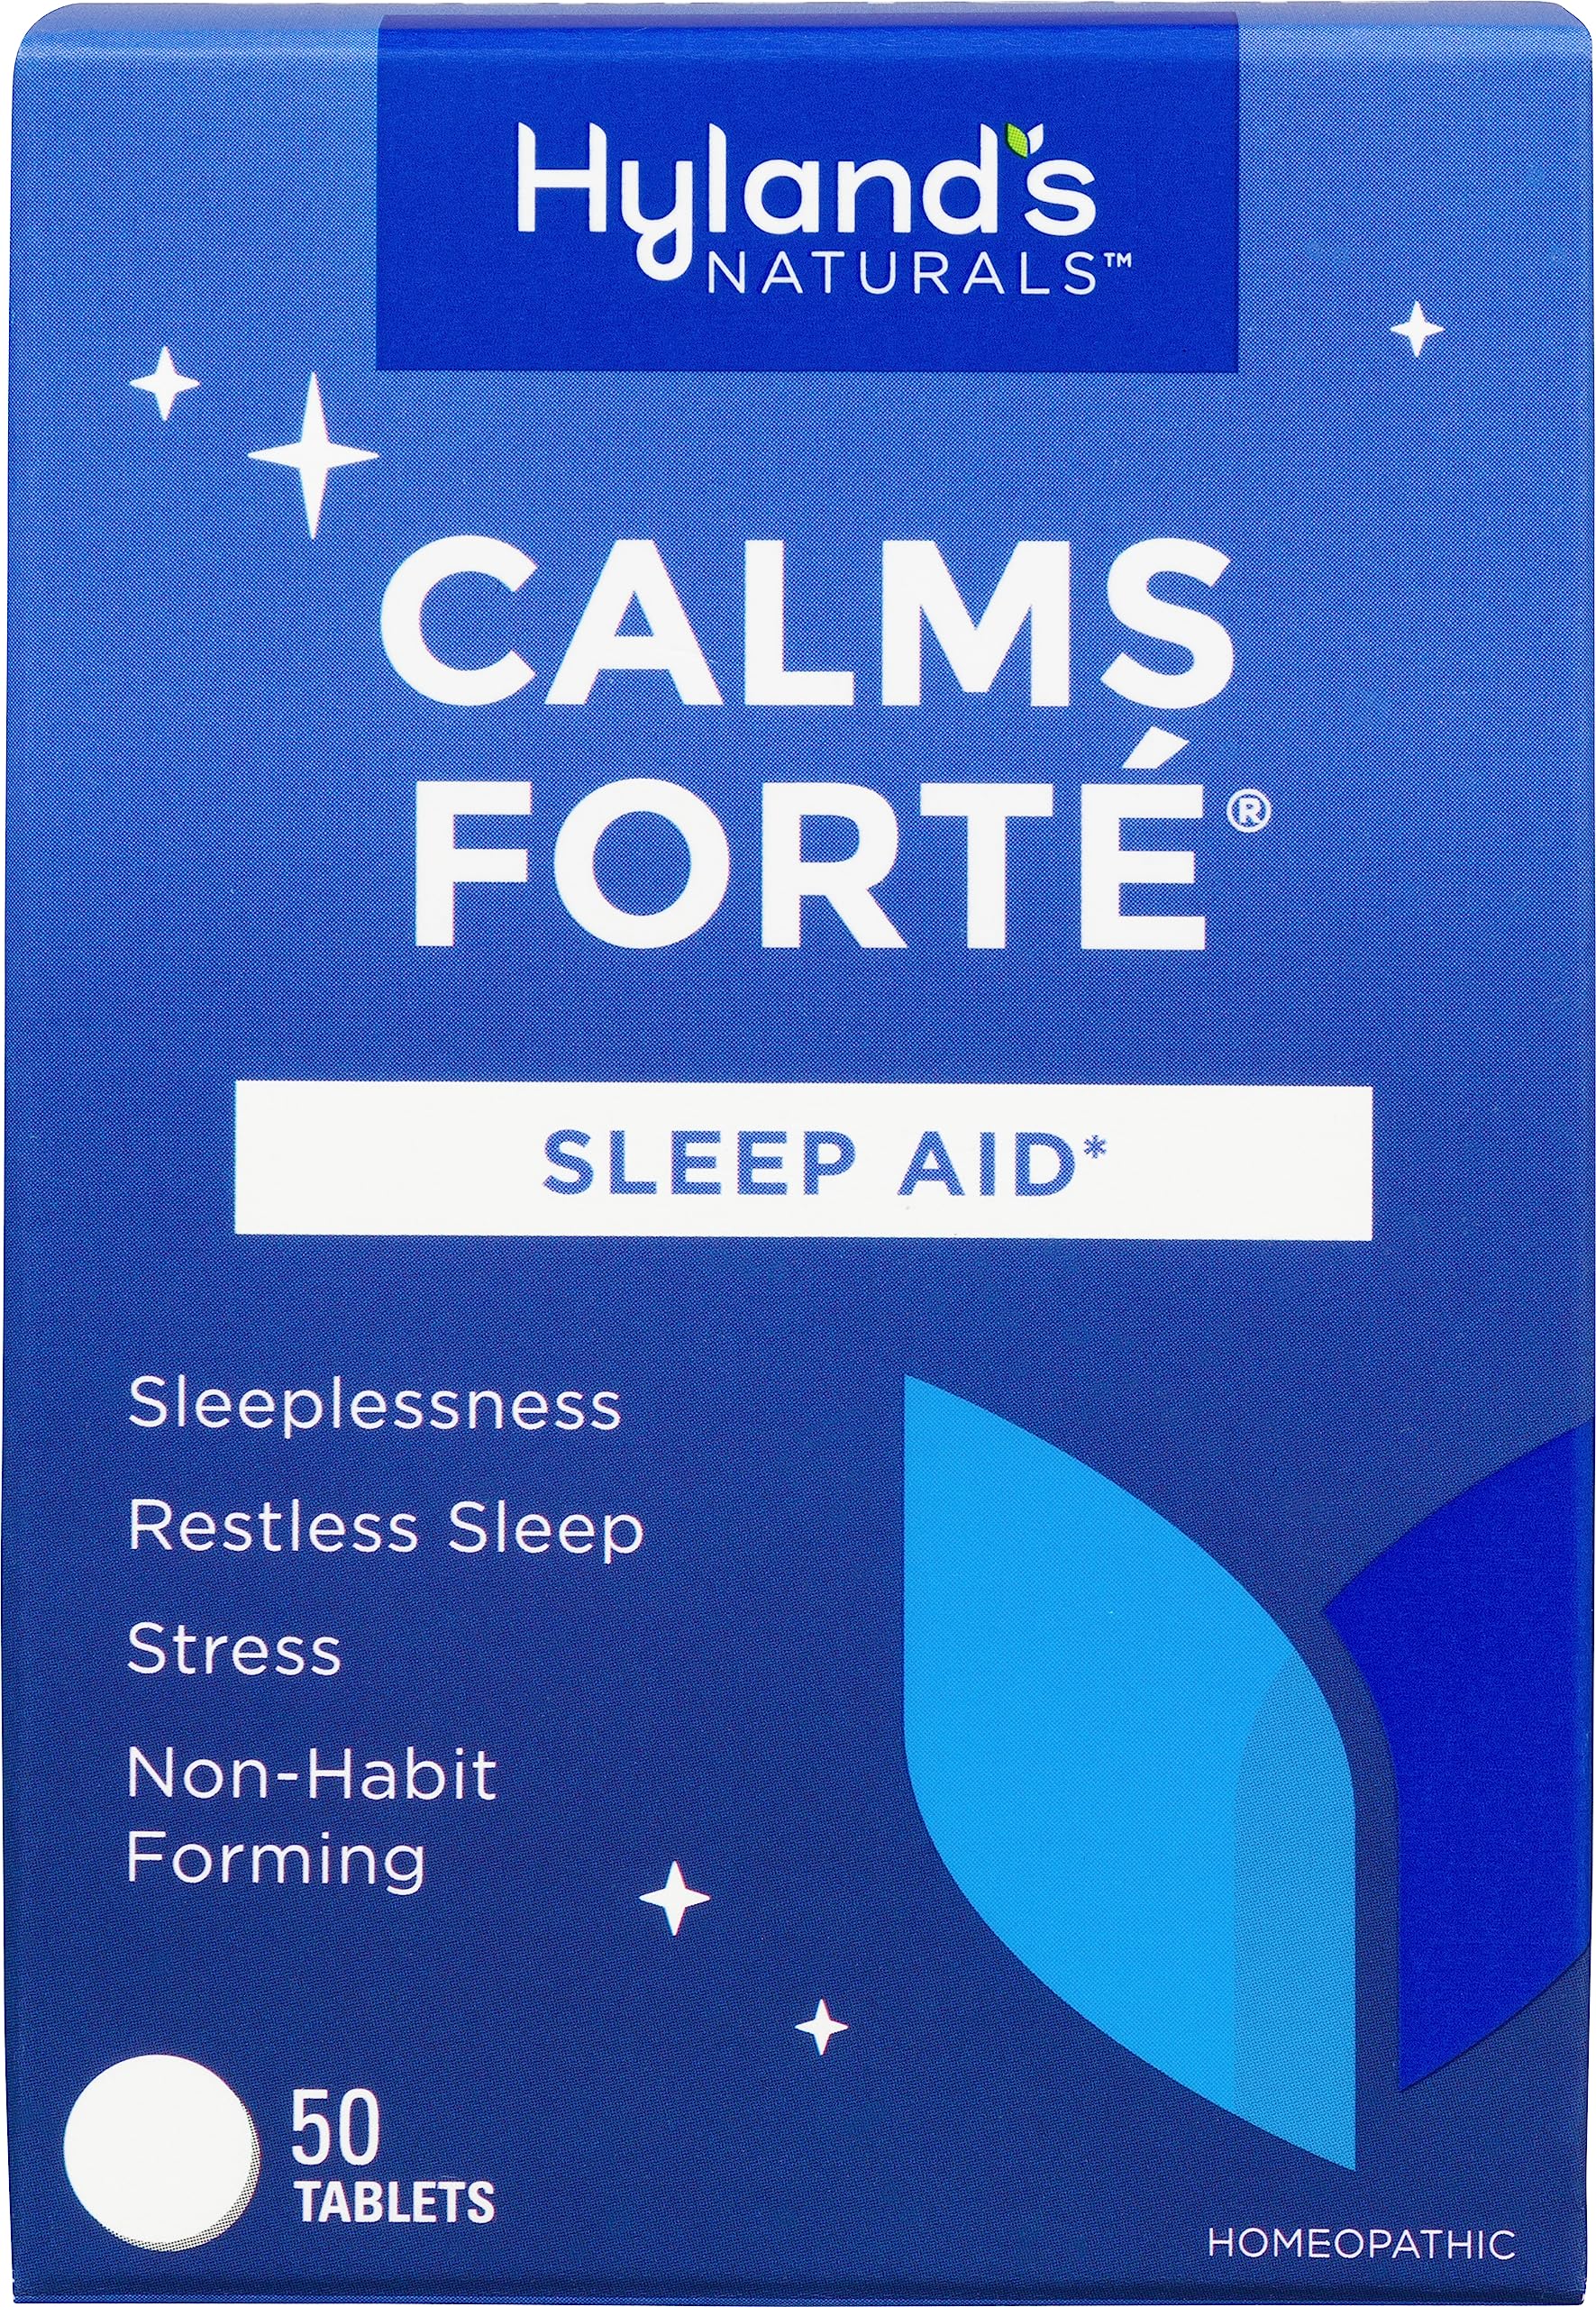 Hyland’s Calms Forte' Sleep Aid Tablets, Natural Relief of Nervous Tension and Occasional Sleeplessness, 50 Count